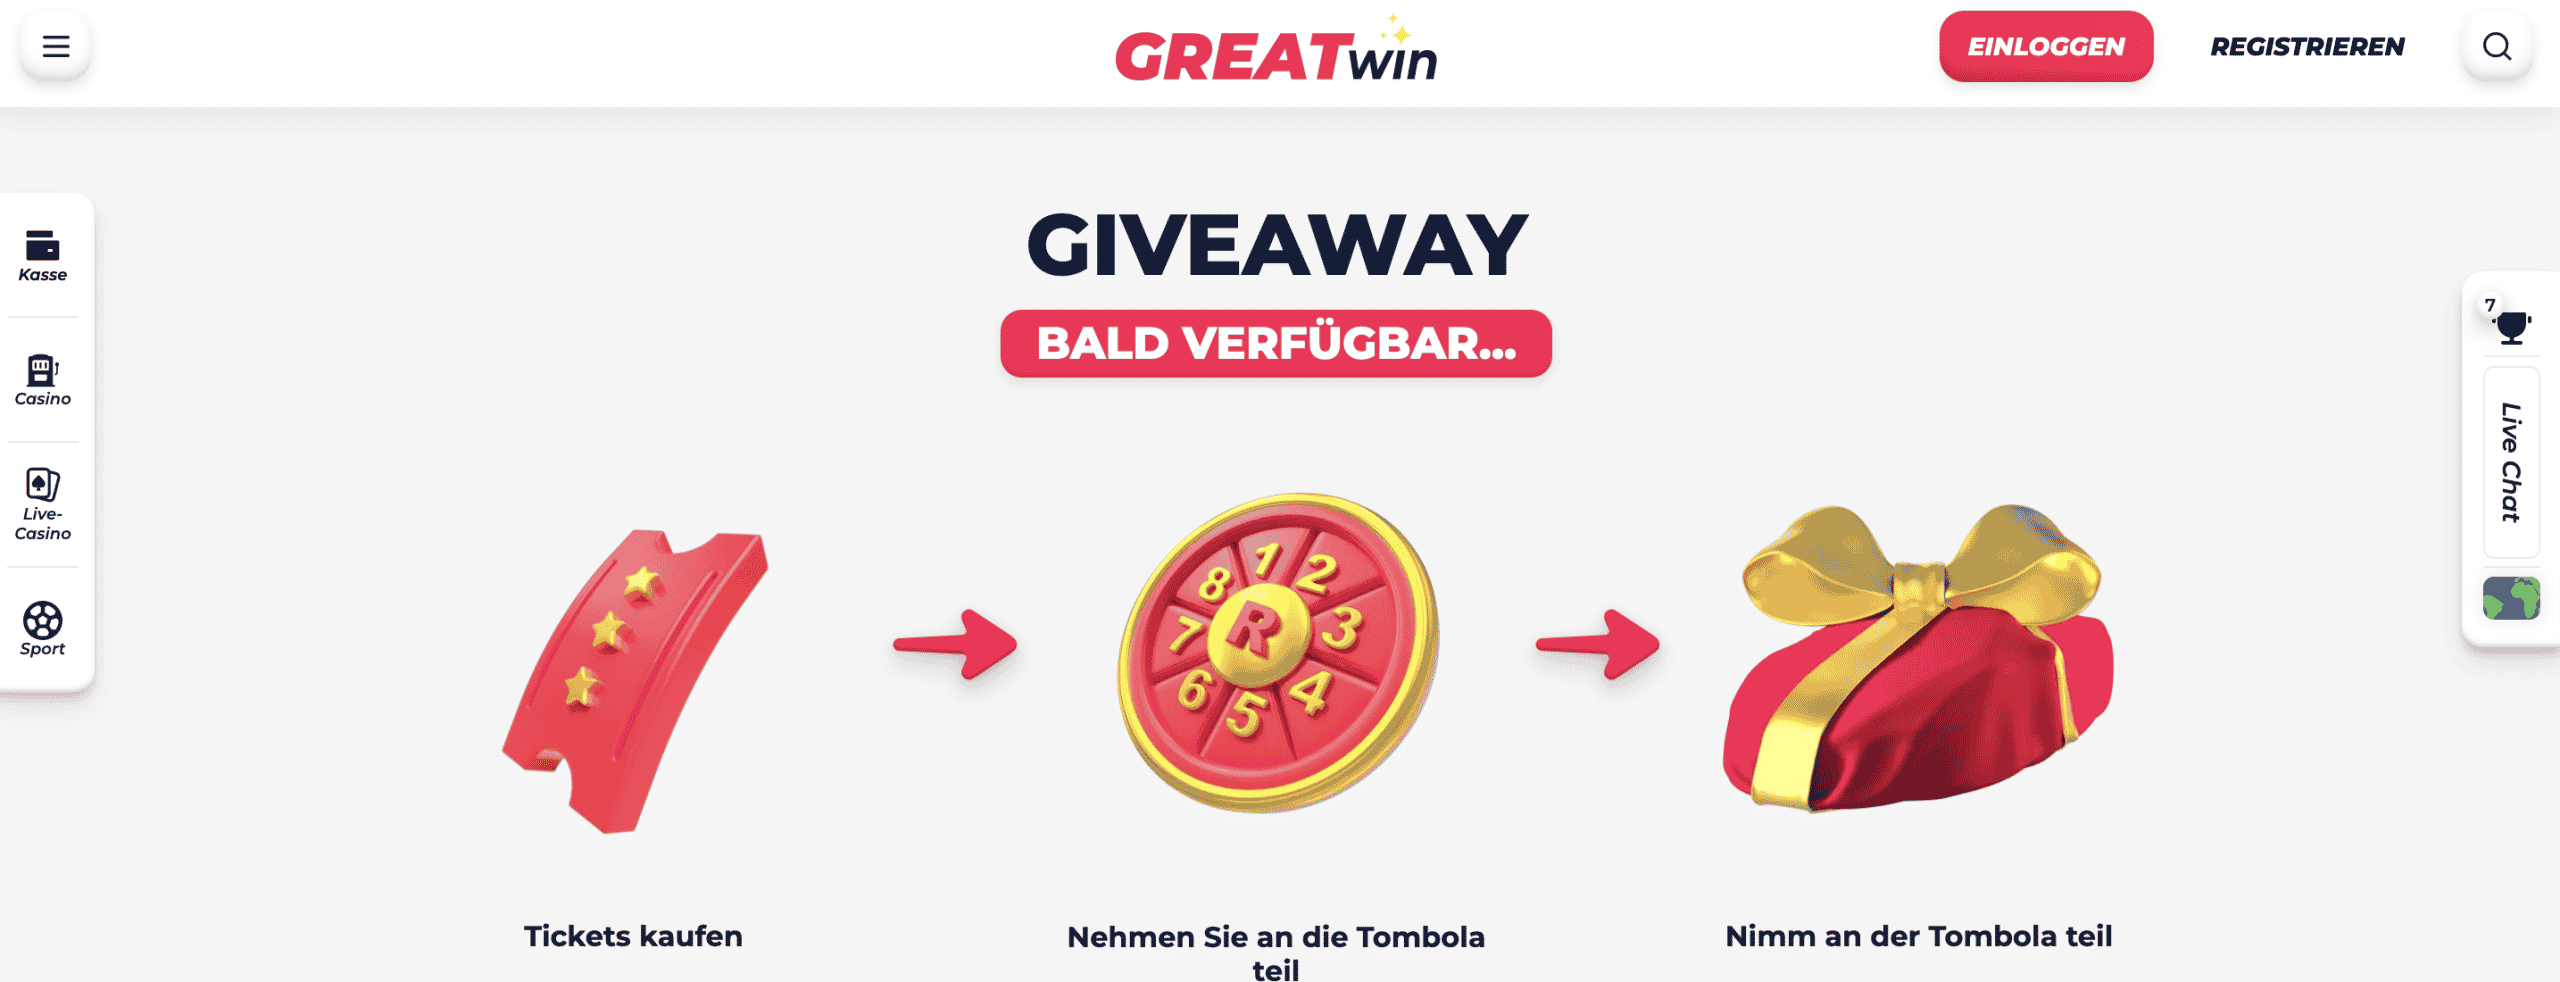 Greatwin Giveaway